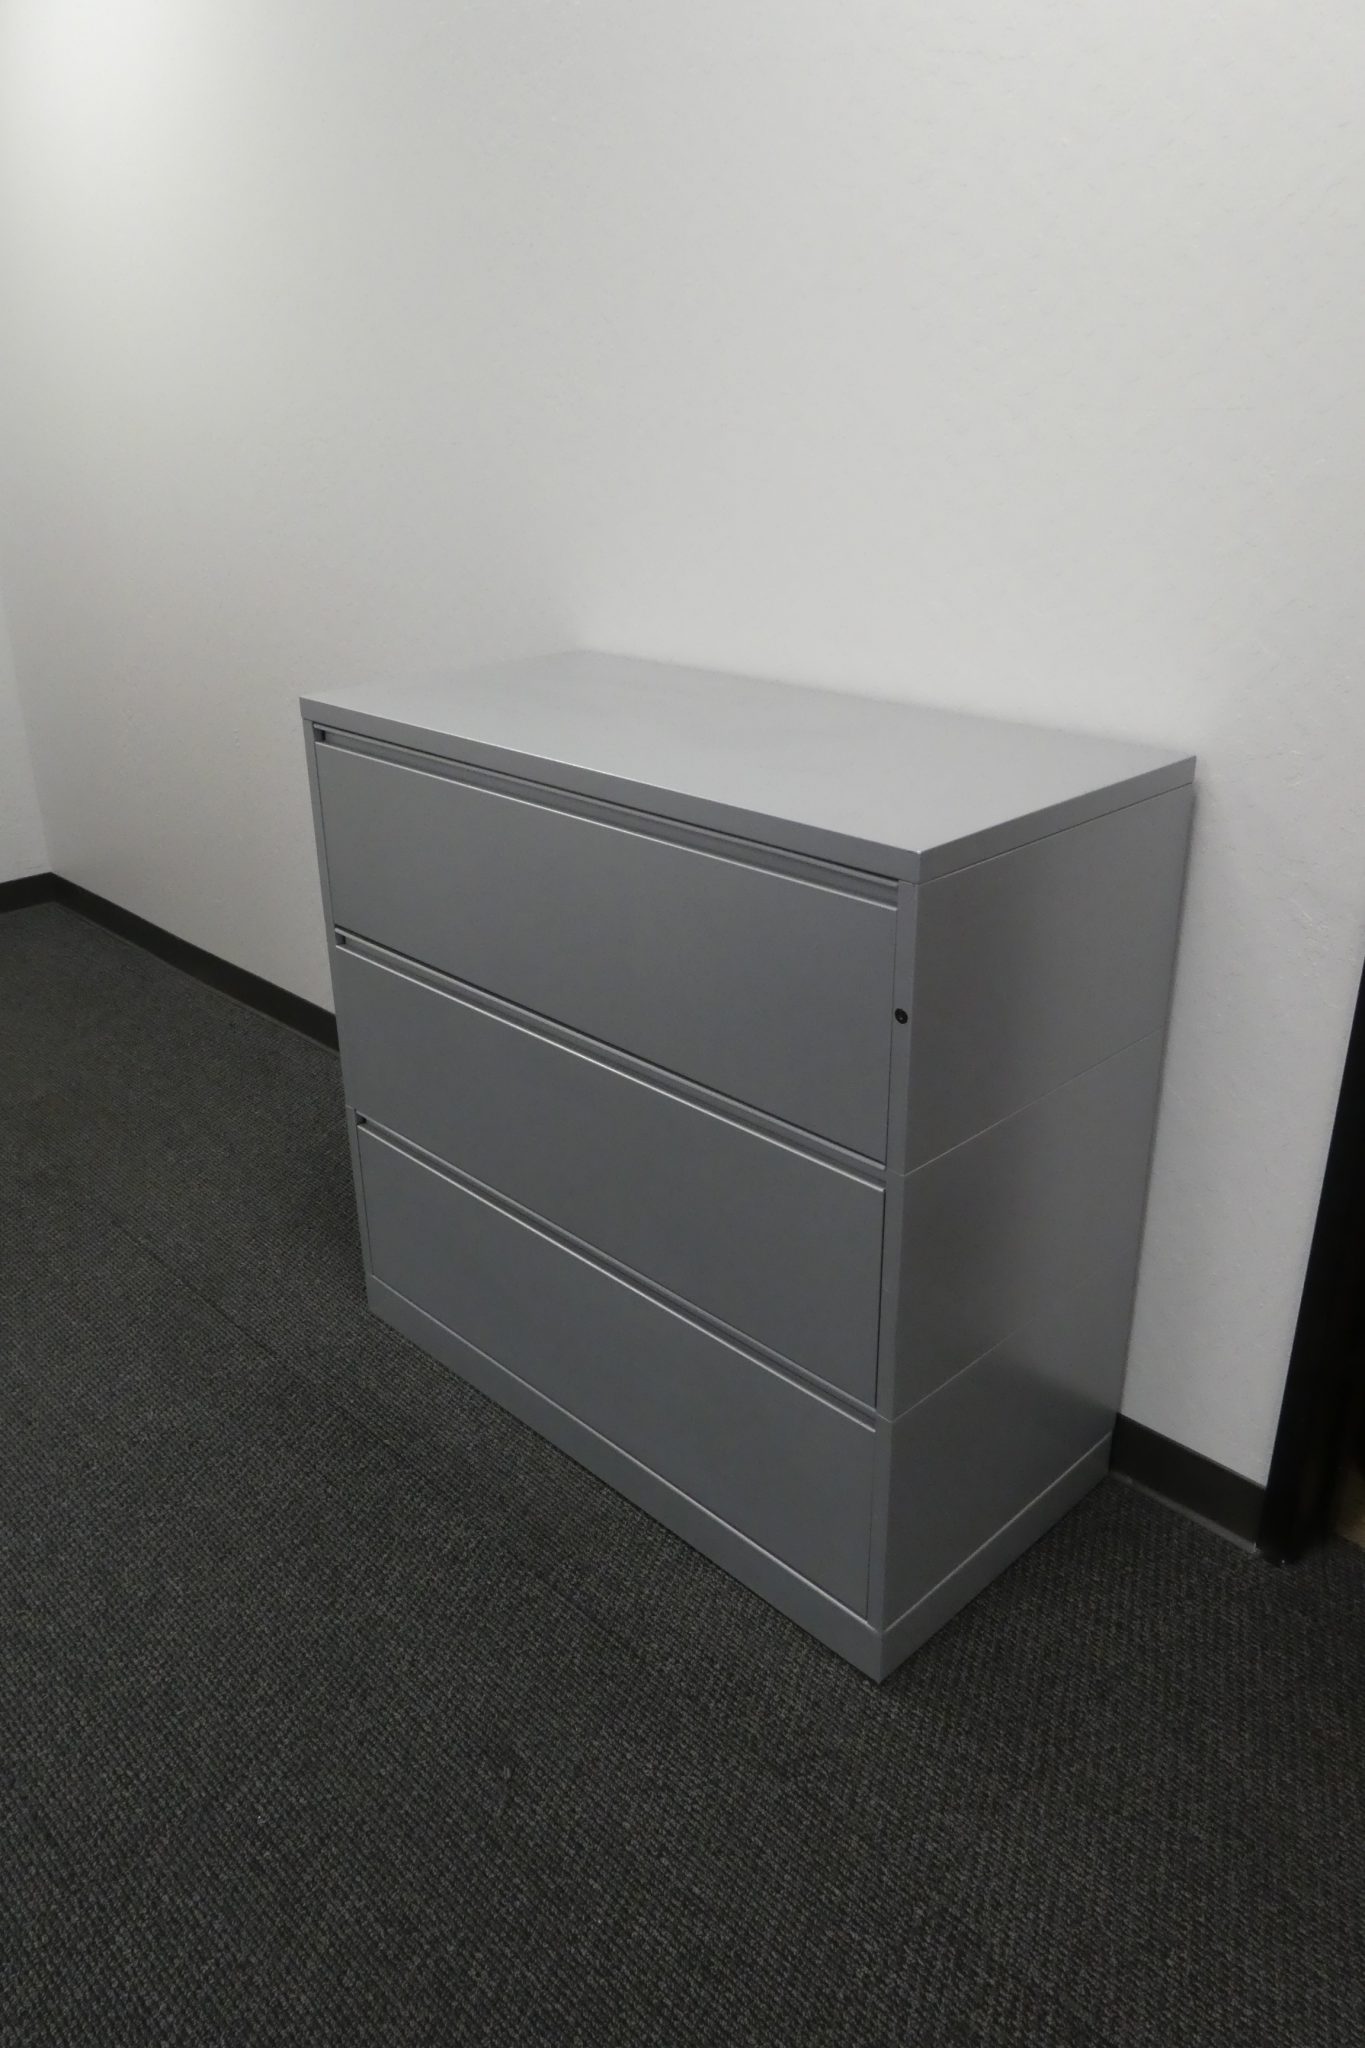 2Dr 30"W x 20"D x 28"H Lateral File Cabinet by Herman Miller Meridian w/Lock&Key 